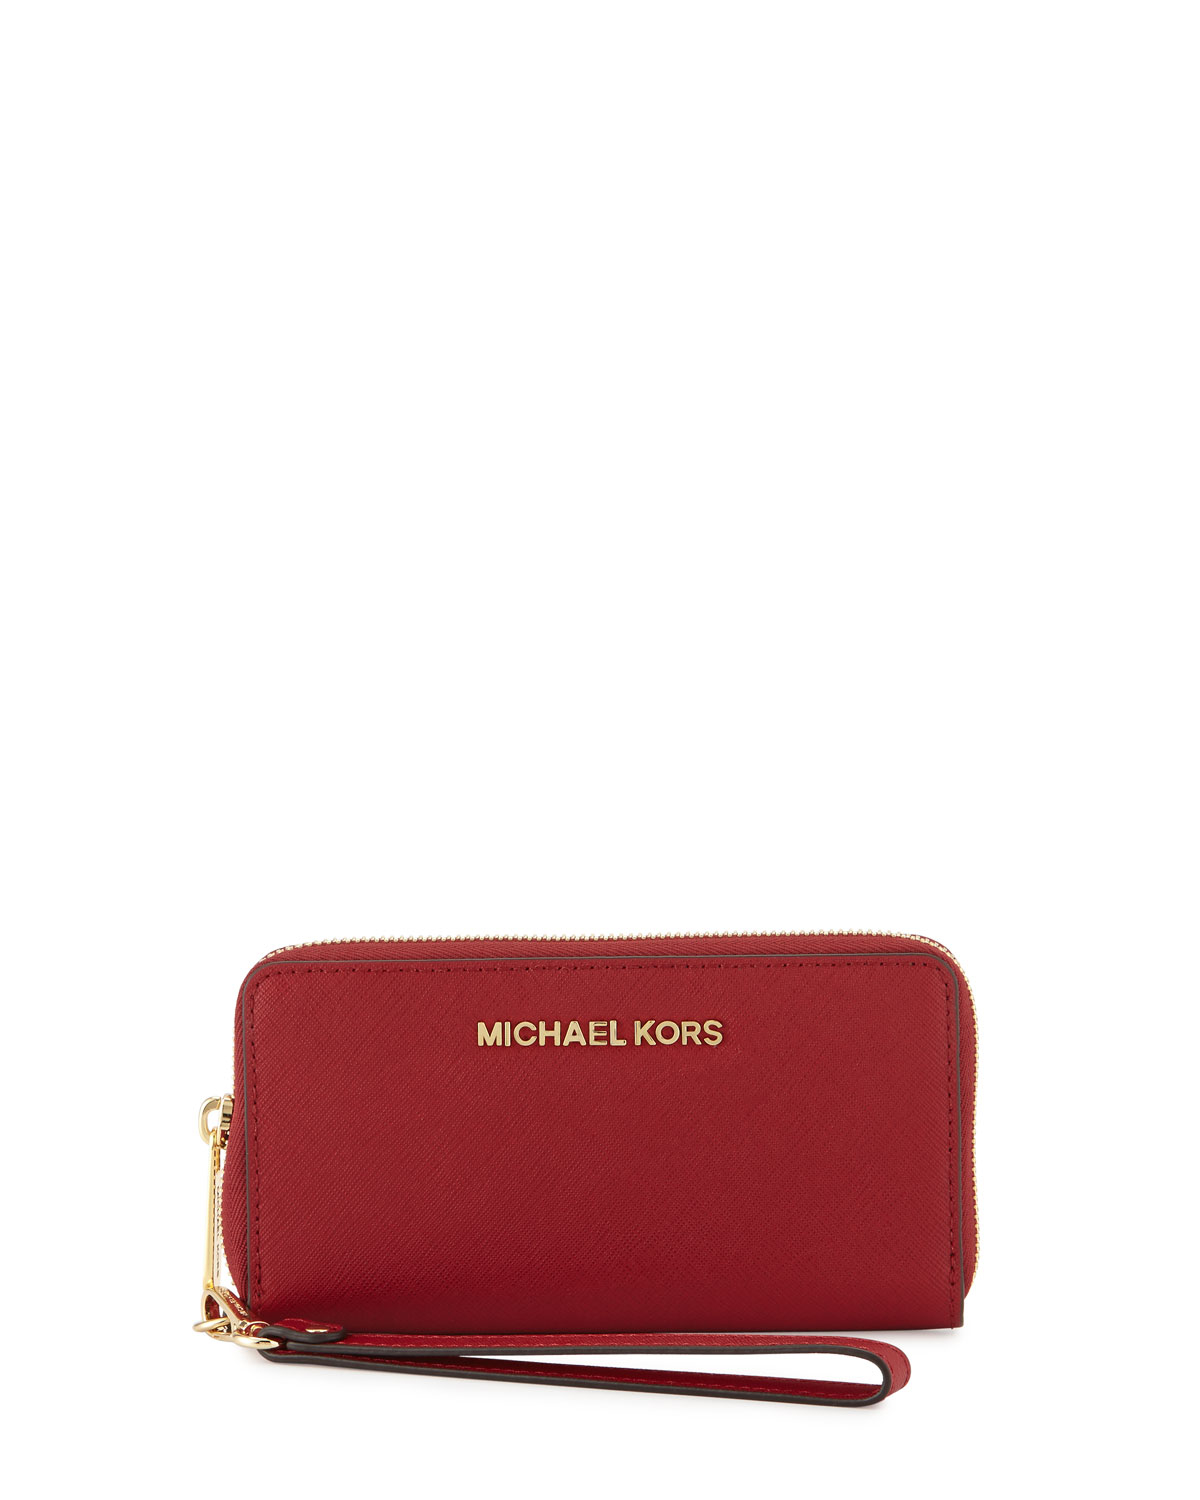 michael kors large multifunction wallet for iphone 5 5s red